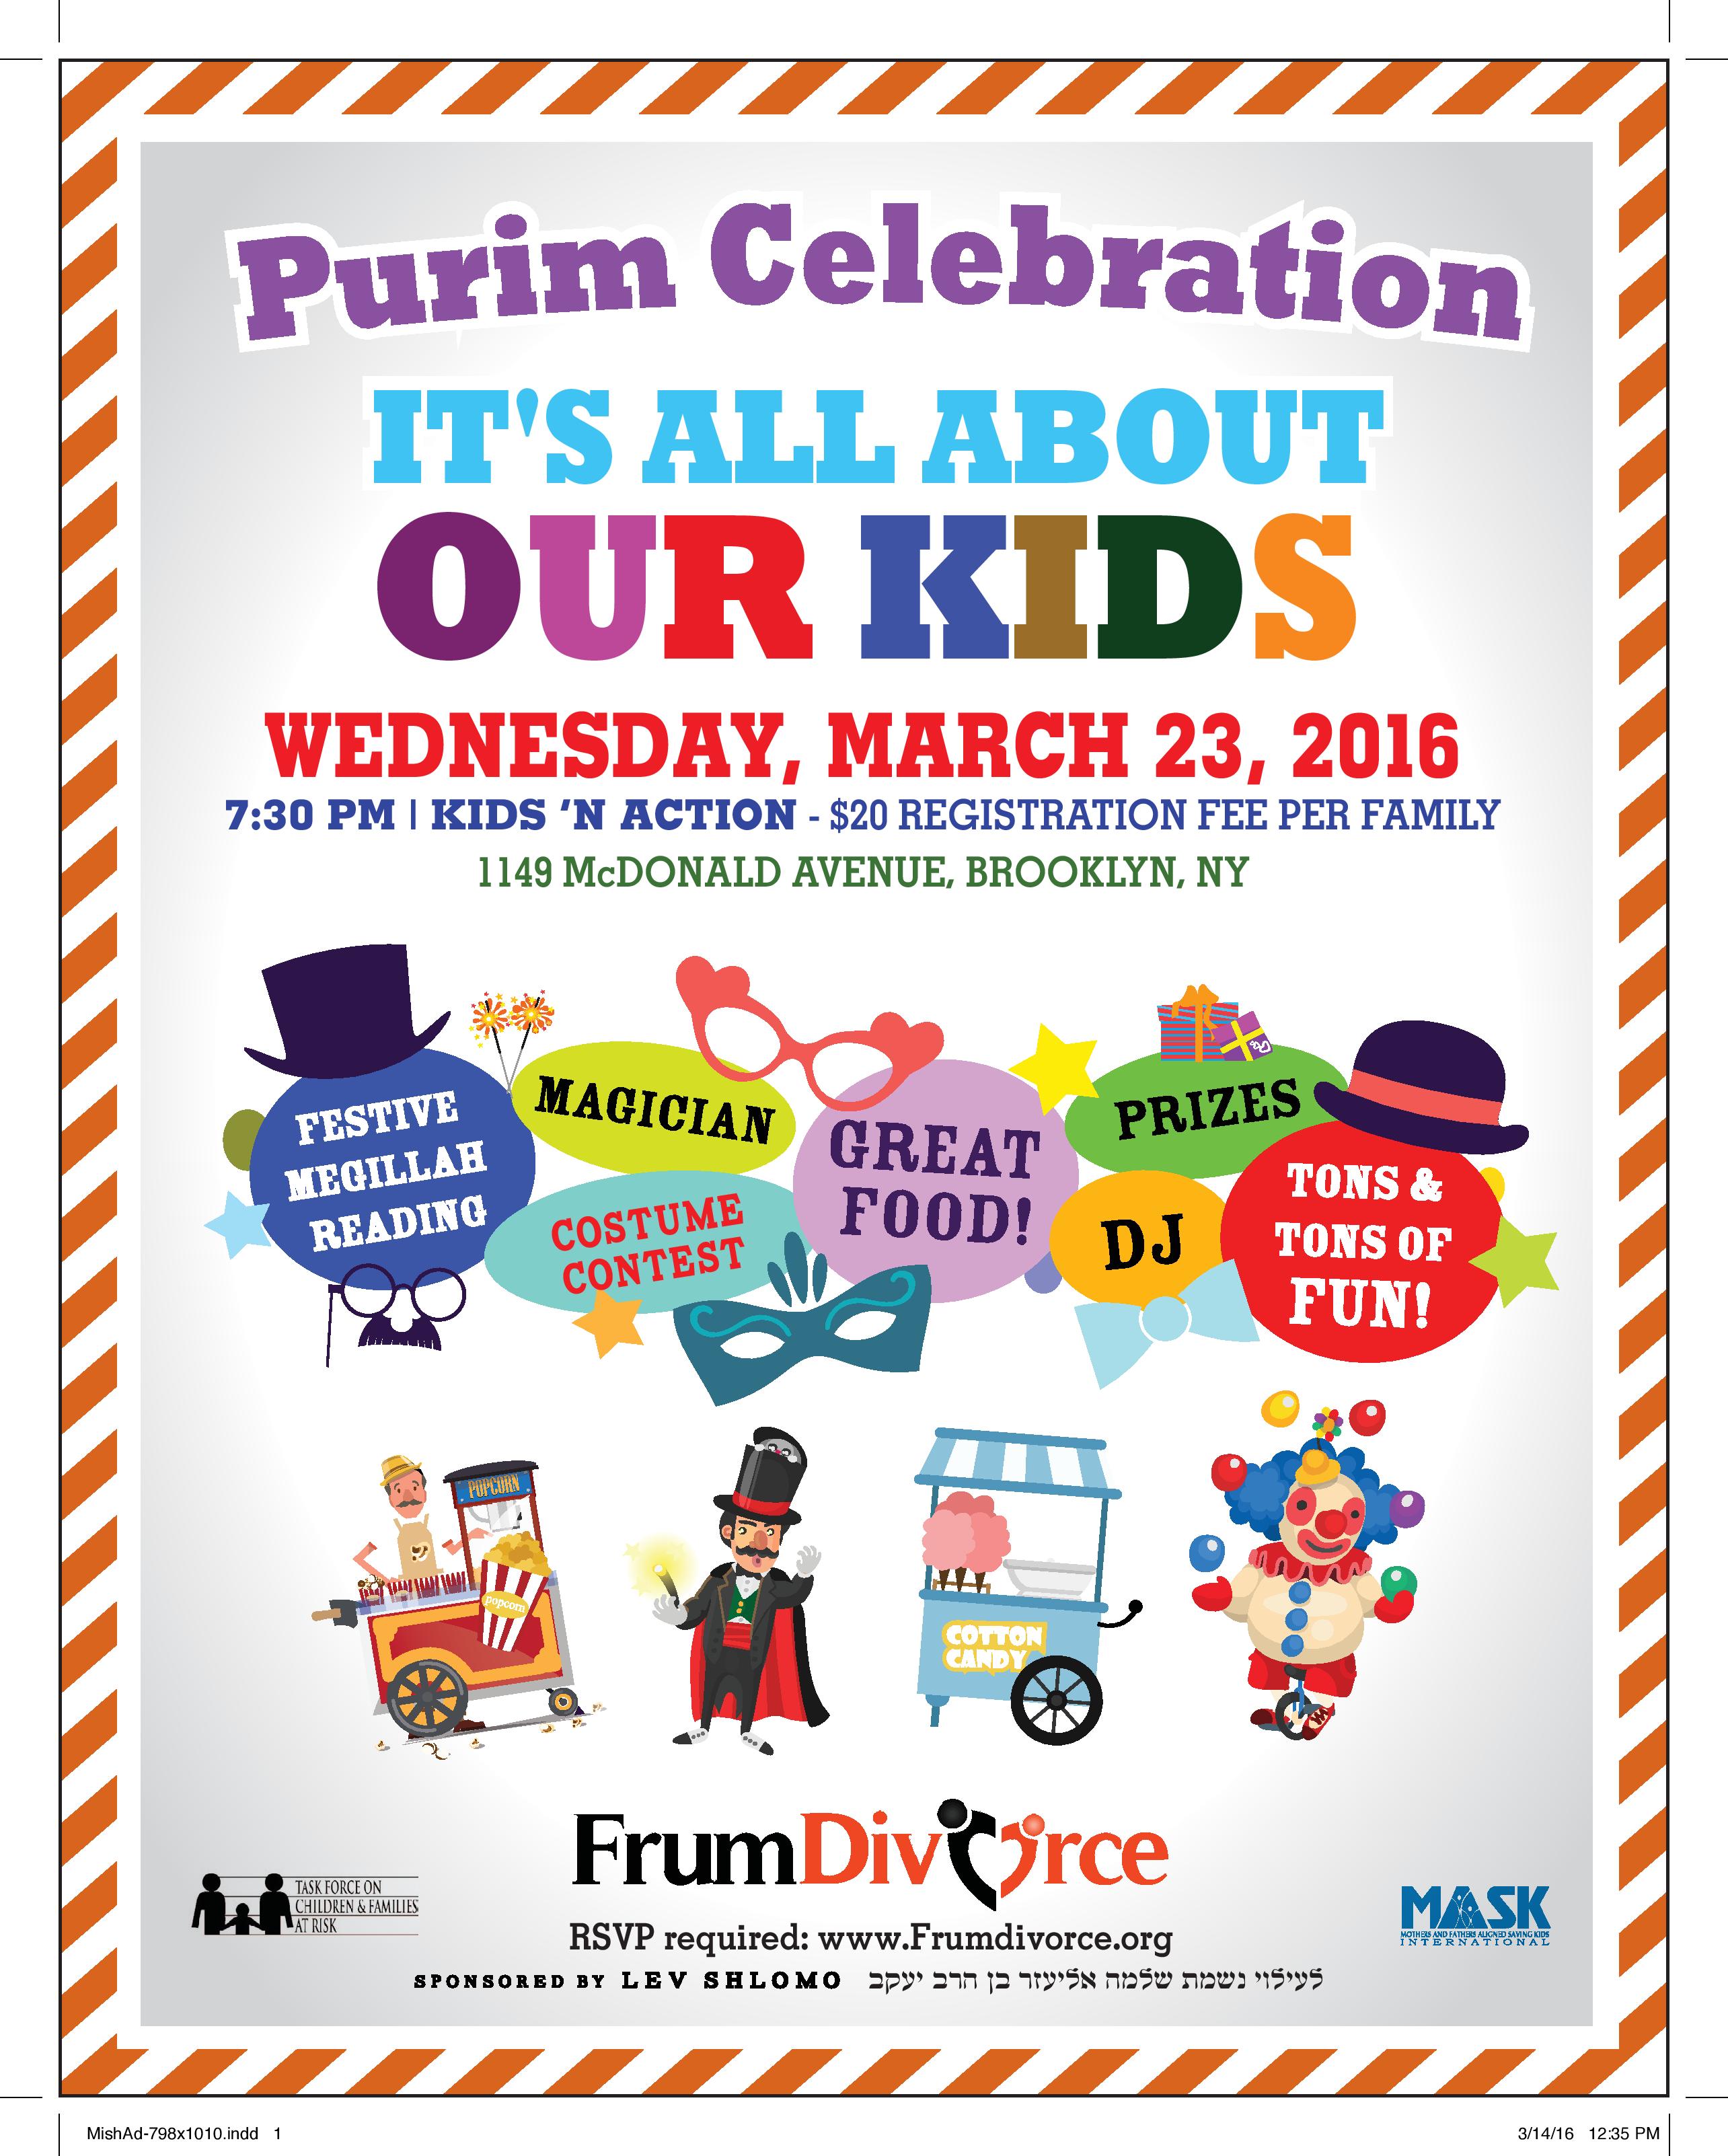 Purim Celebration: It's All About Our Kids